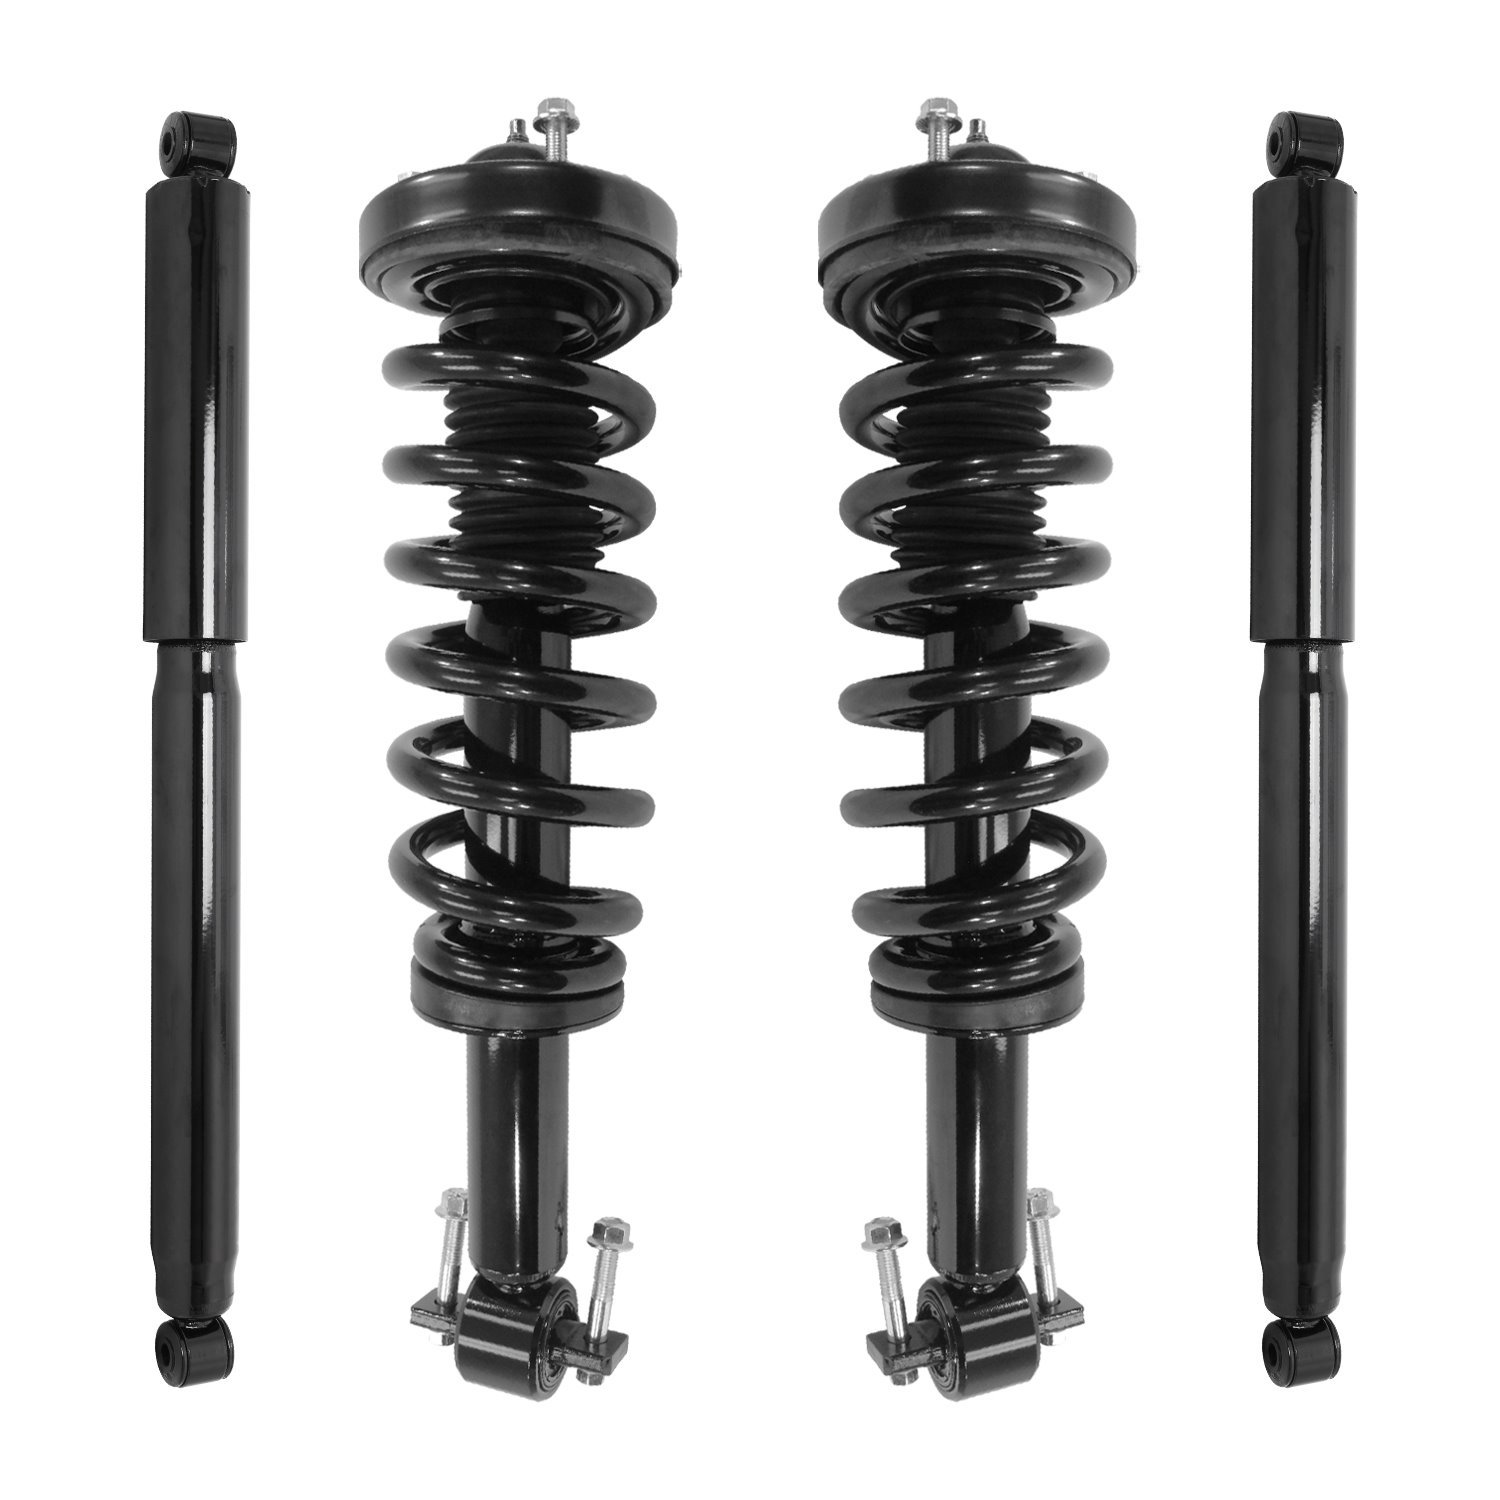 4-13201-252600-001 Front & Rear Suspension Strut & Coil Spring Assembly Fits Select Ford F-150